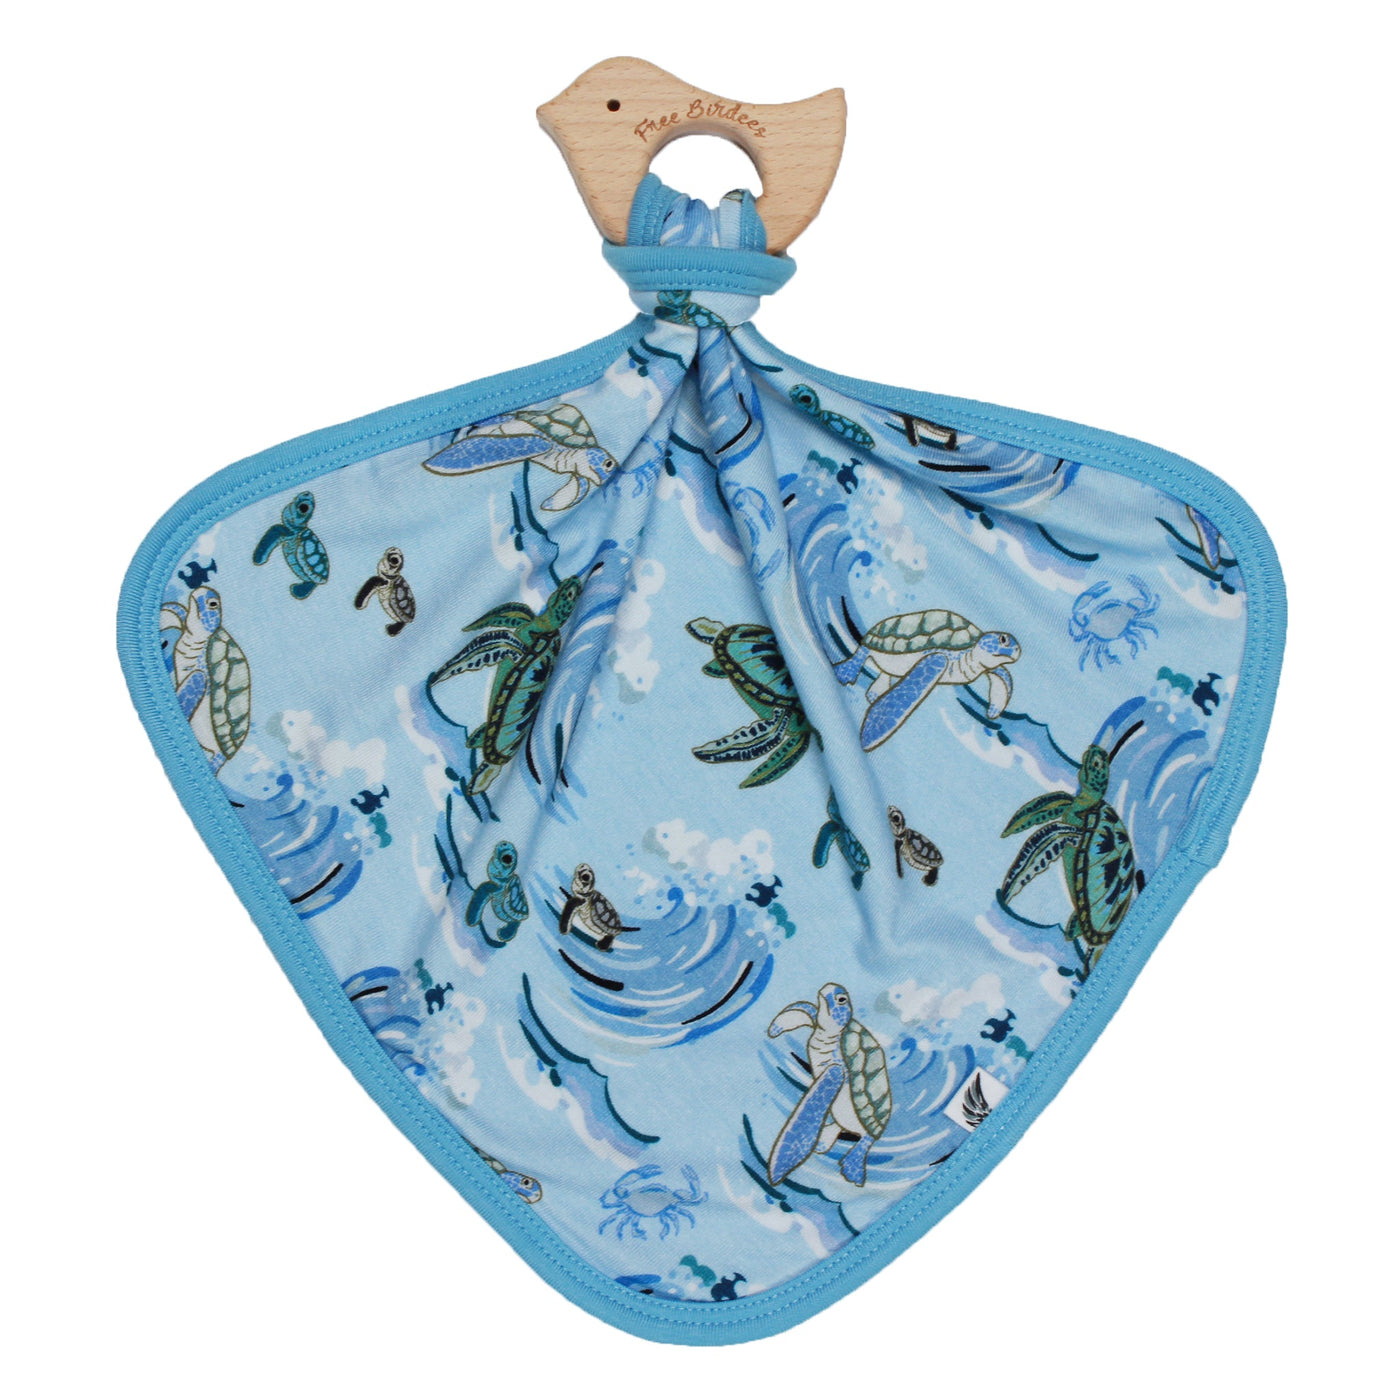 Go with the Flow Sea Turtles Lovey with Wooden Teether - Free Birdees